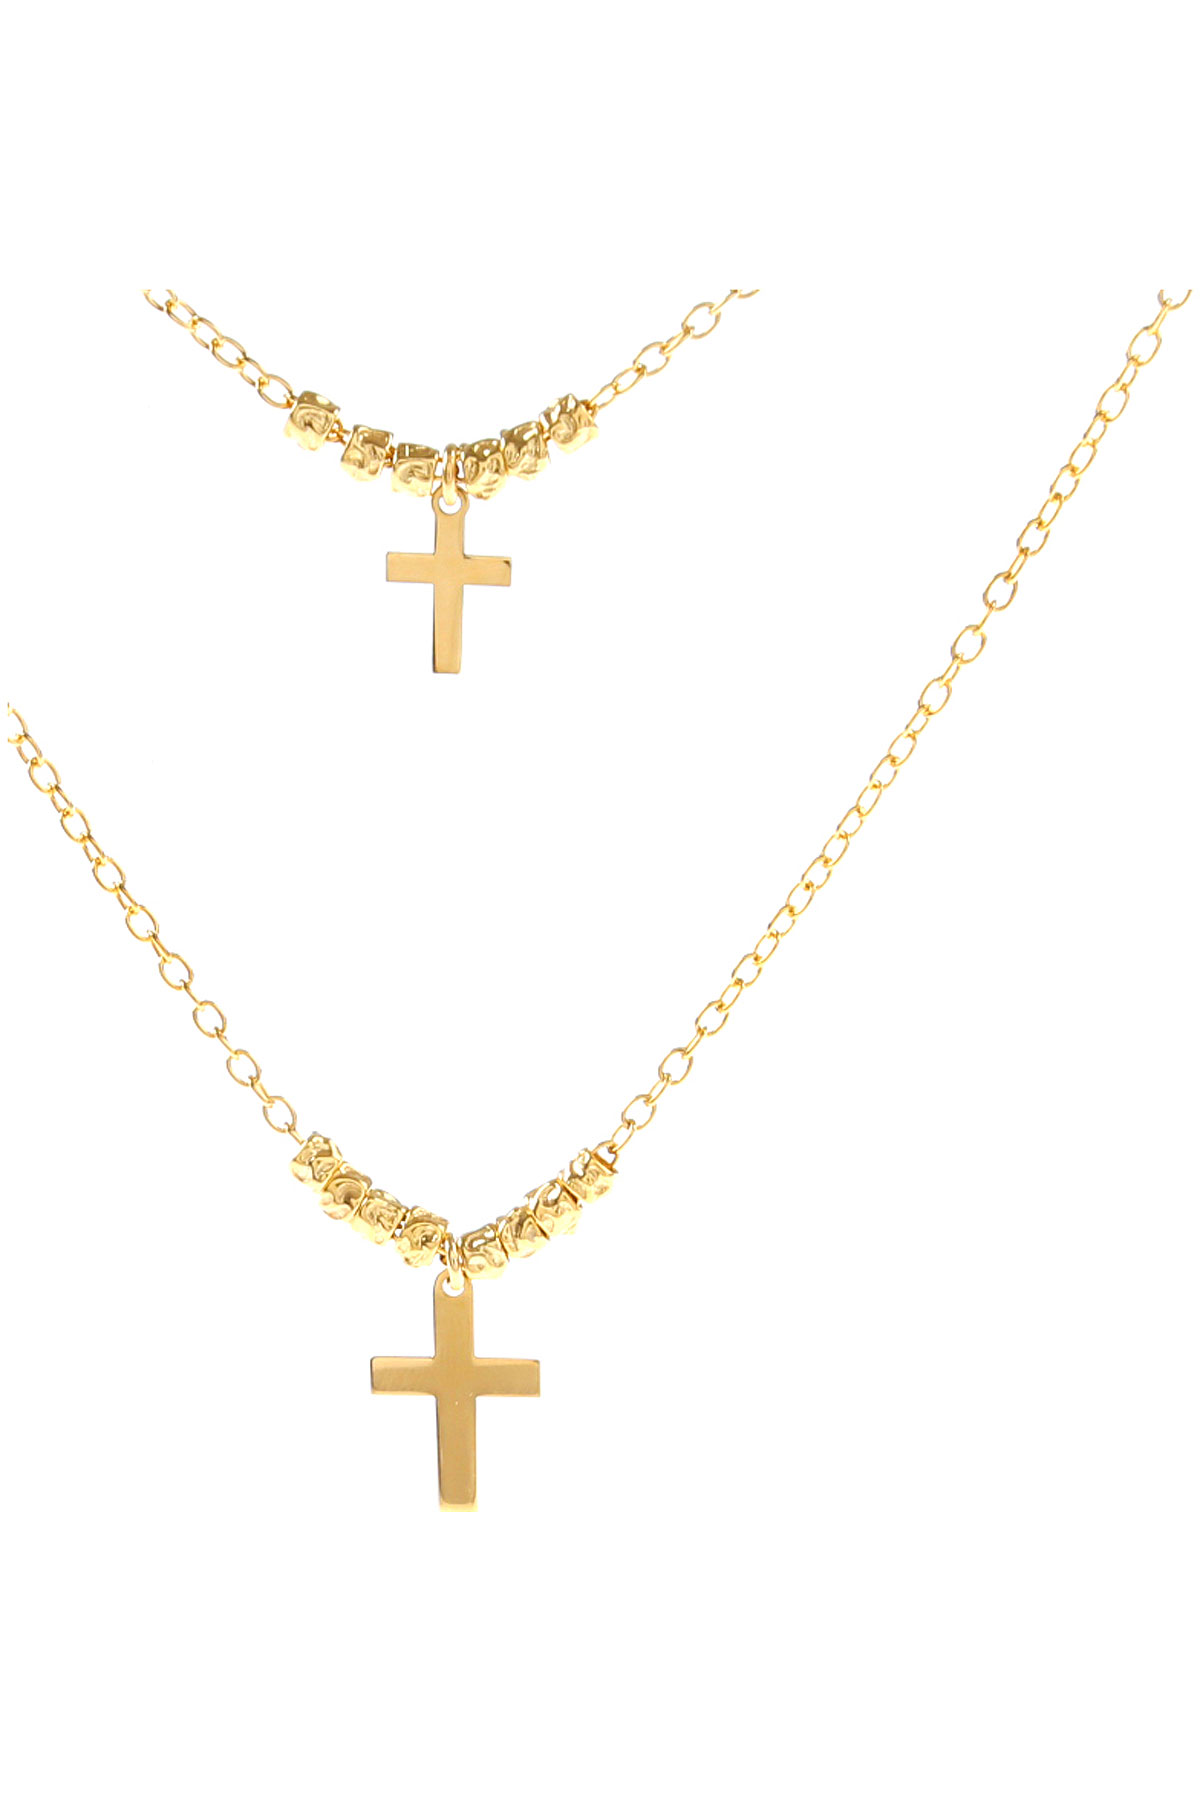 Francesca AngeloneFrancesca Angelone Necklaces, Yellow Gold, Silver 925 ...